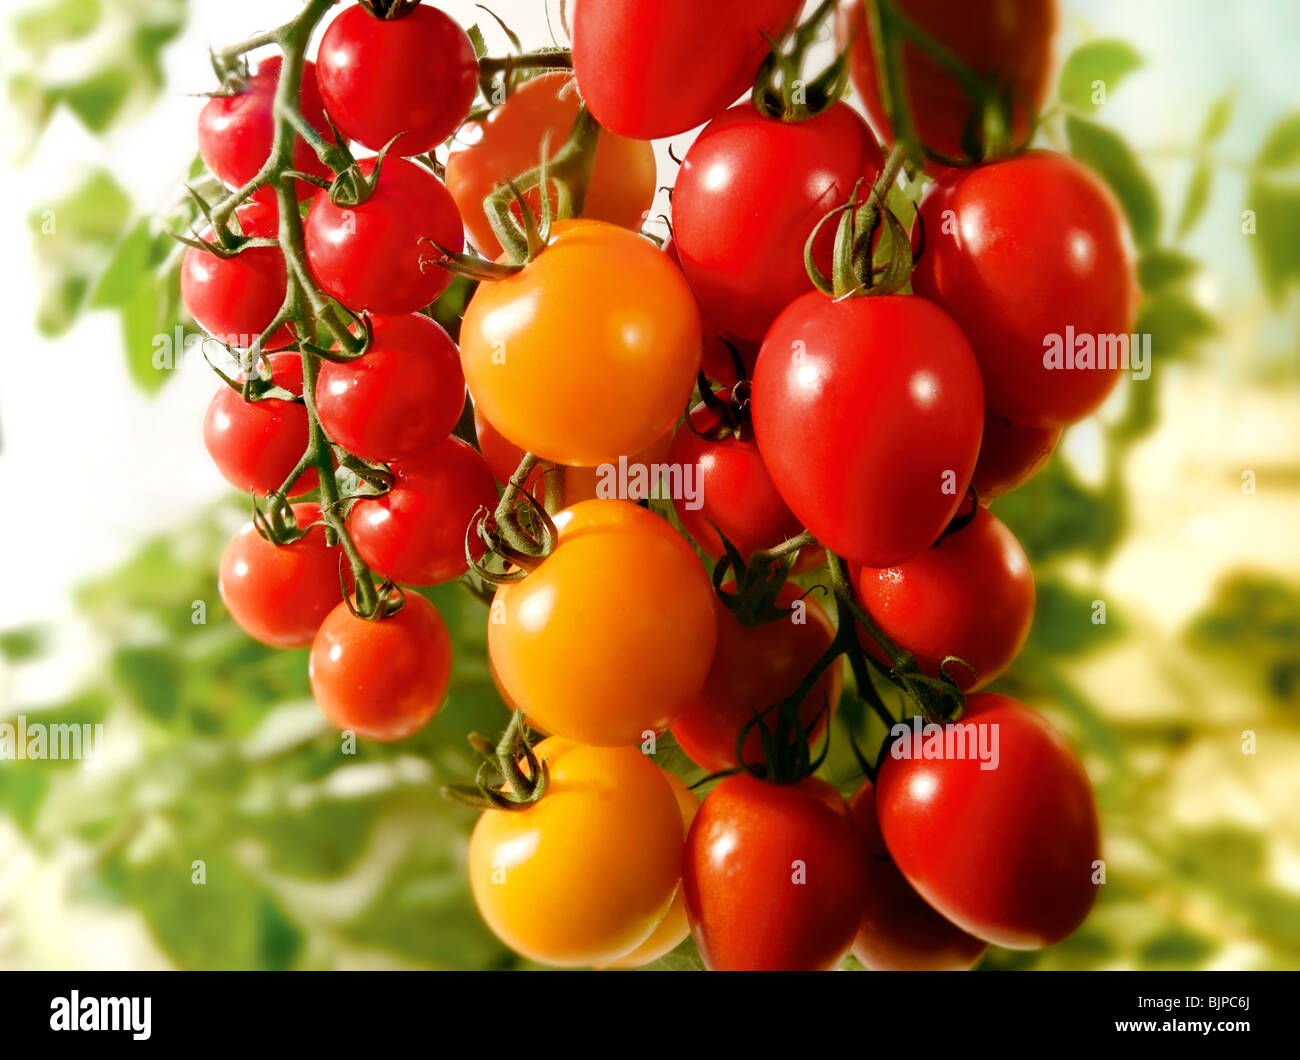 Selection of fresh red and yellow tomatoes and plum tomatoes food photography Stock Photo